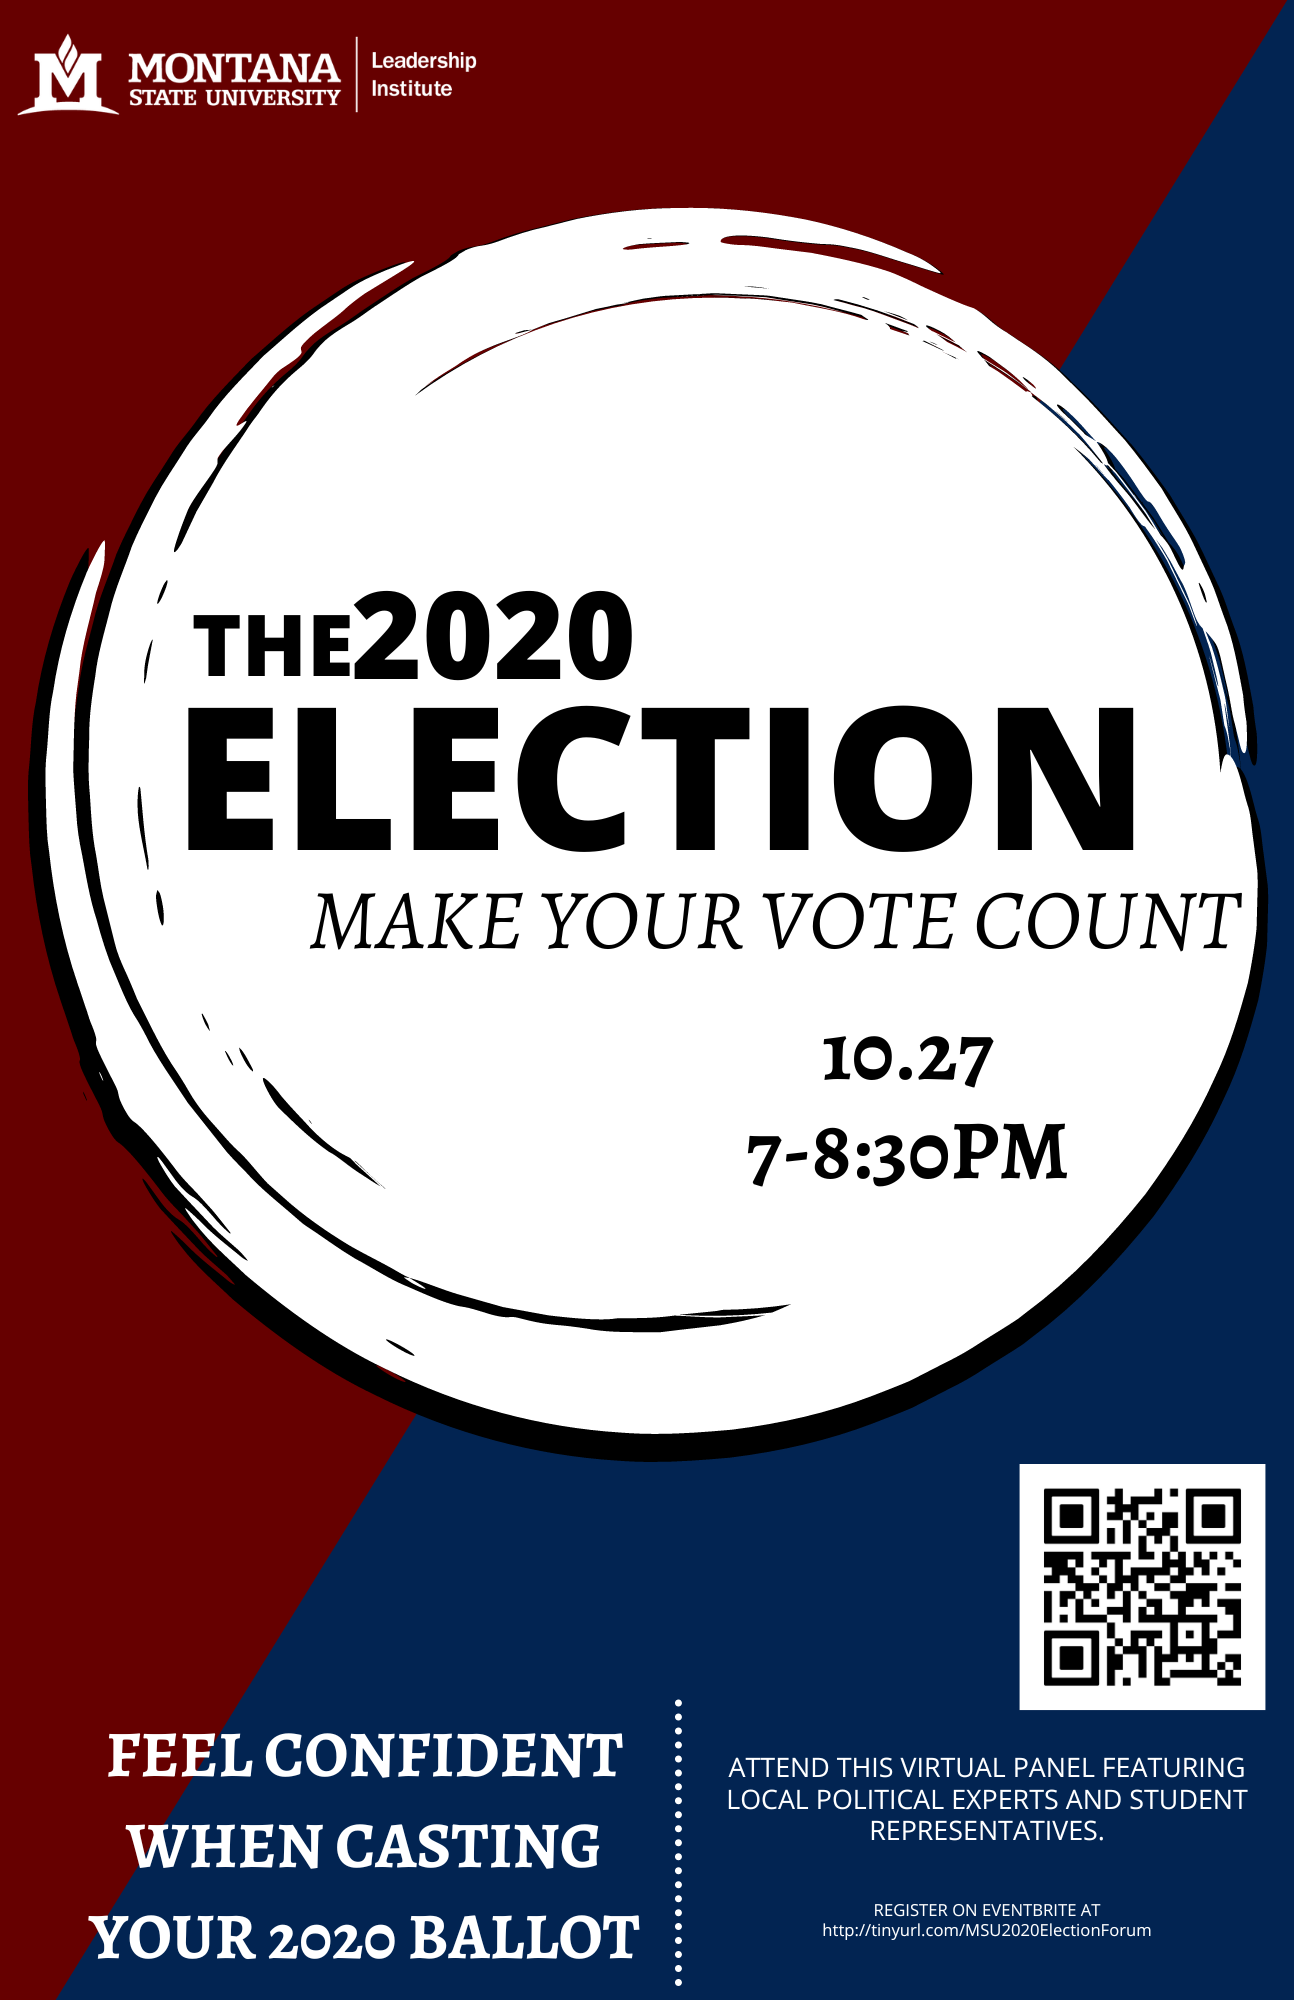 2020 Election: Make your vote count